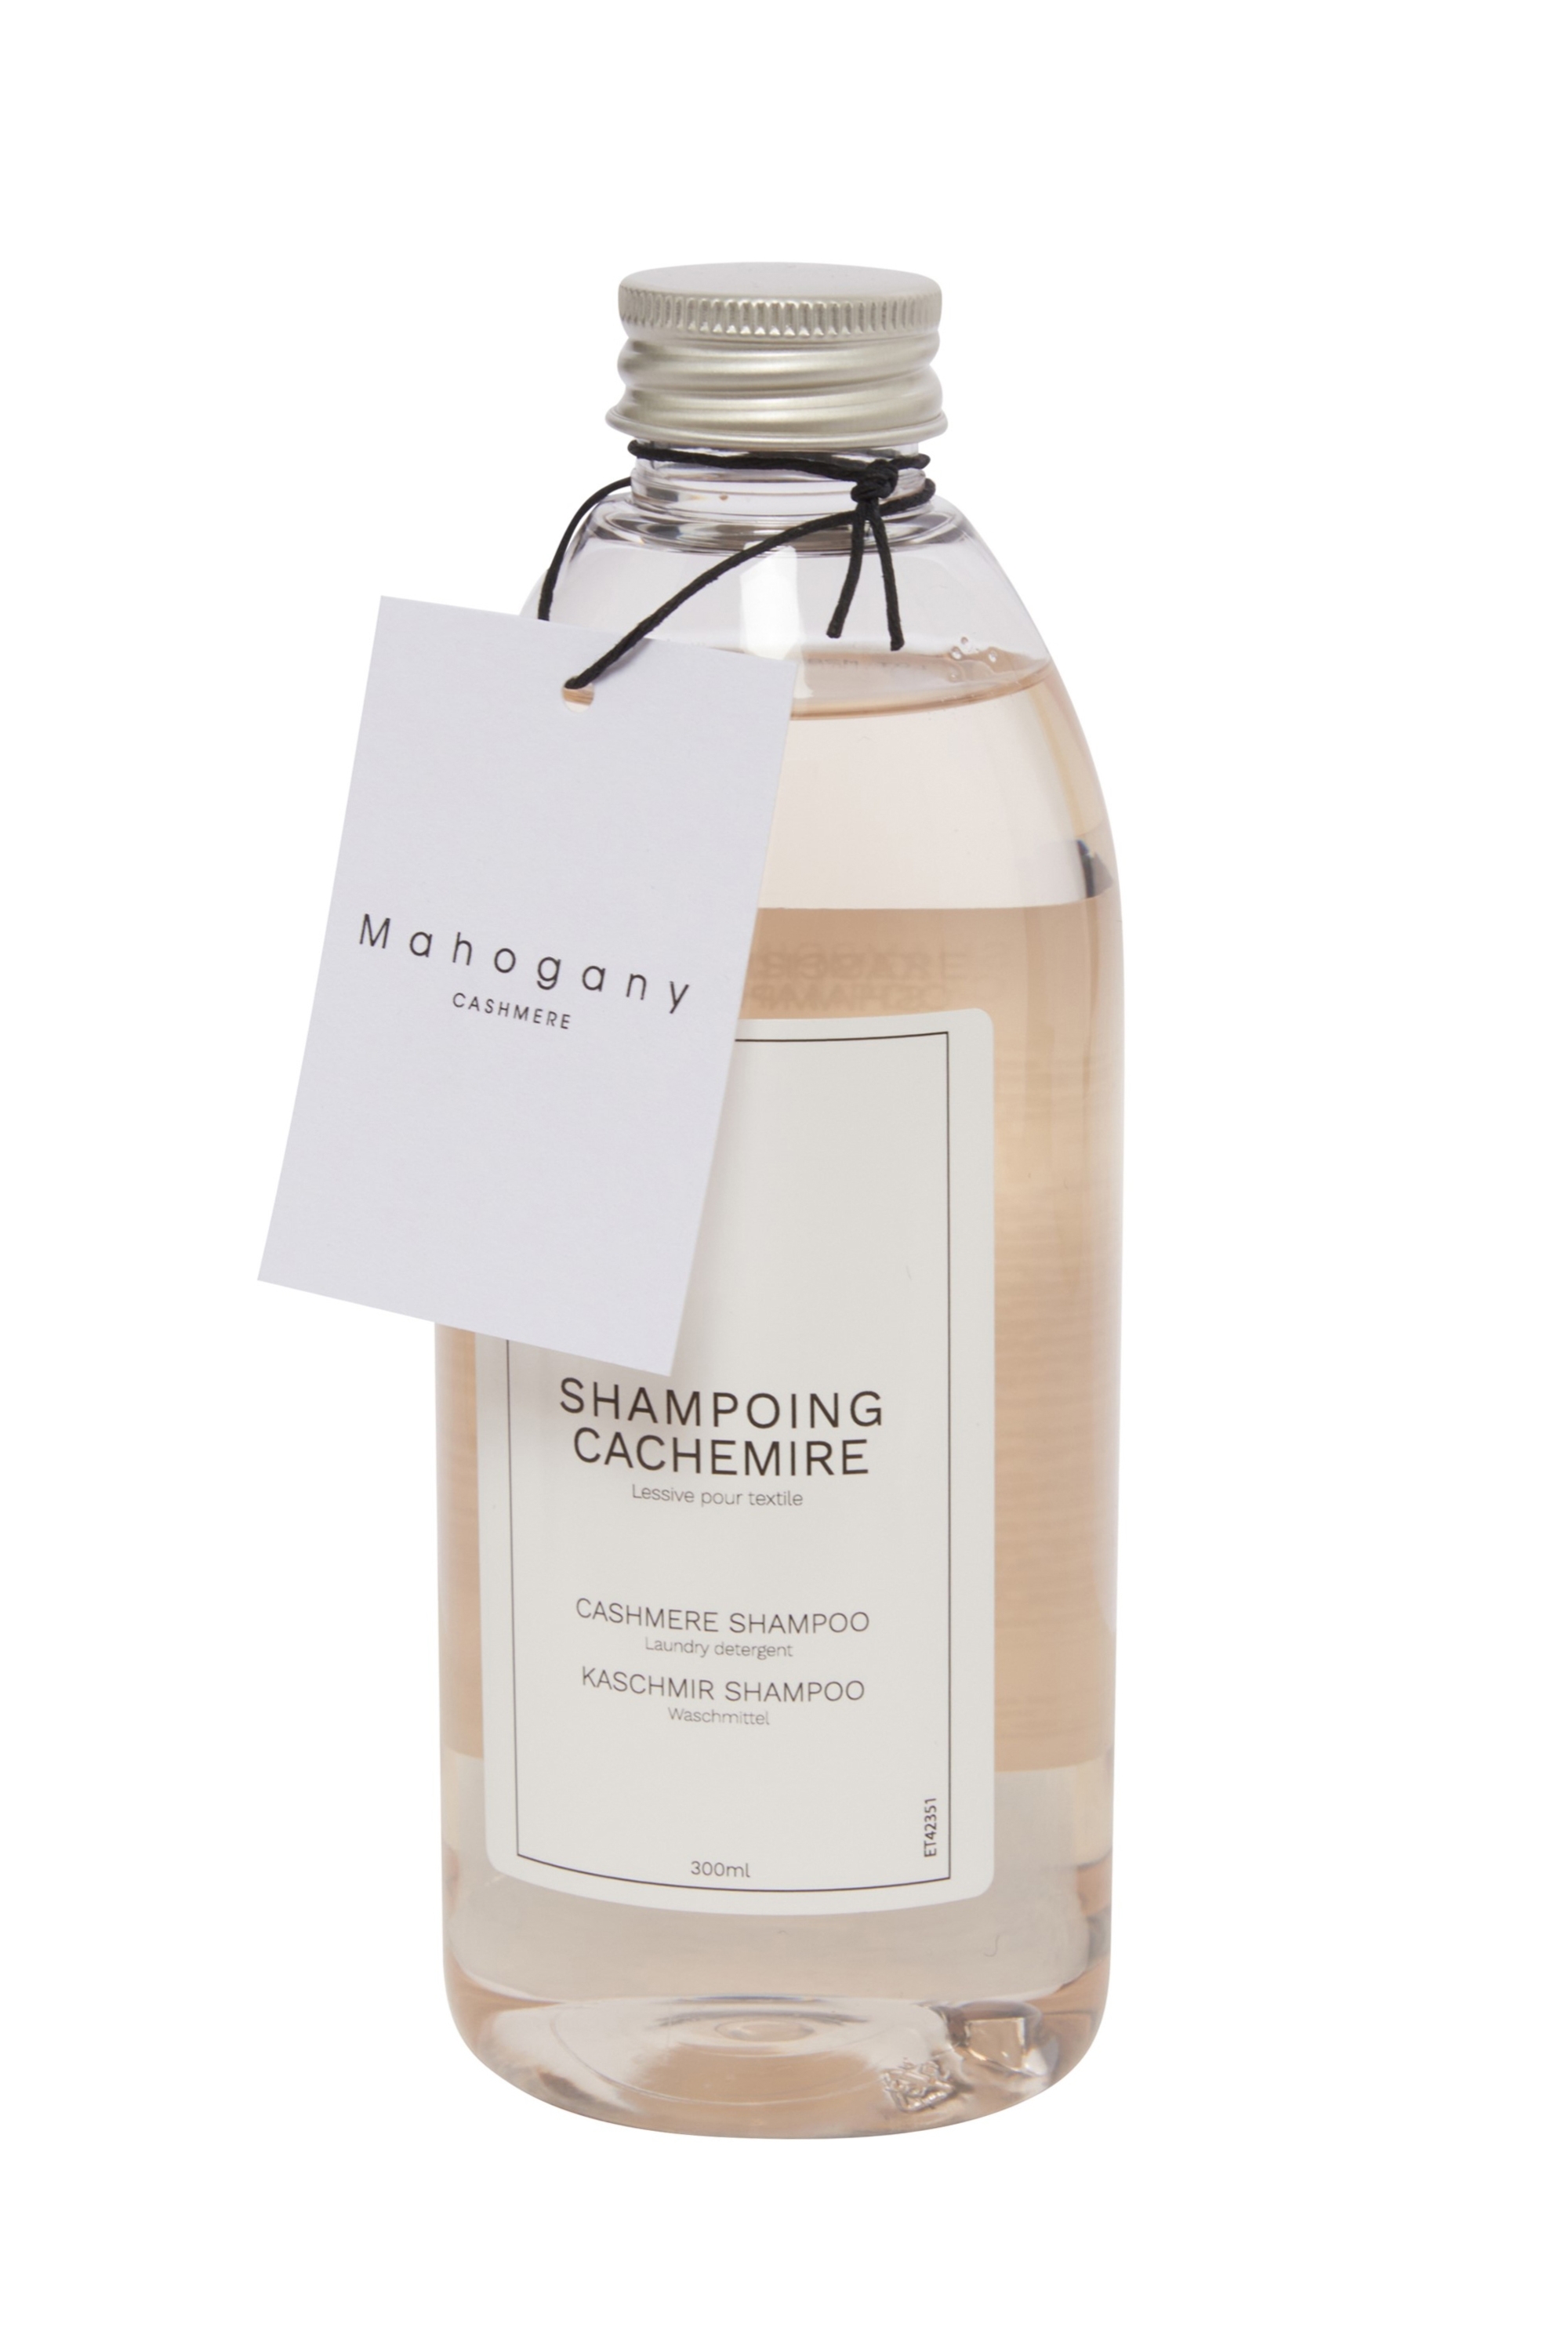 Shampoo accessories exclusive cashmere shampoo natural one size